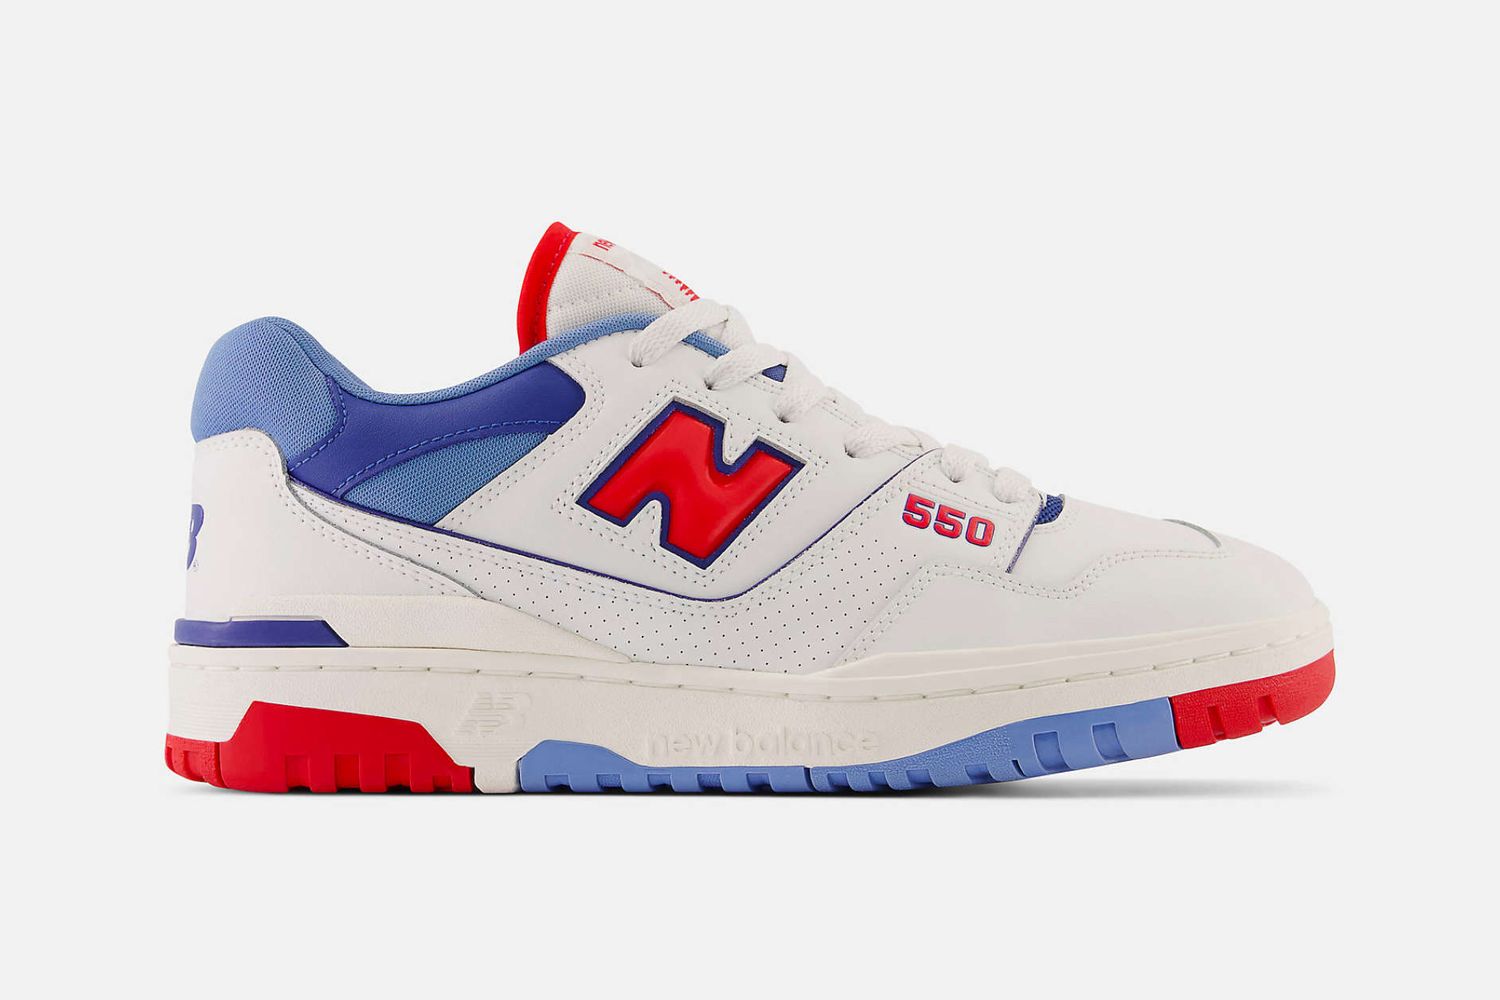 New Balance 550: Best Collaborations & General Release Colorways